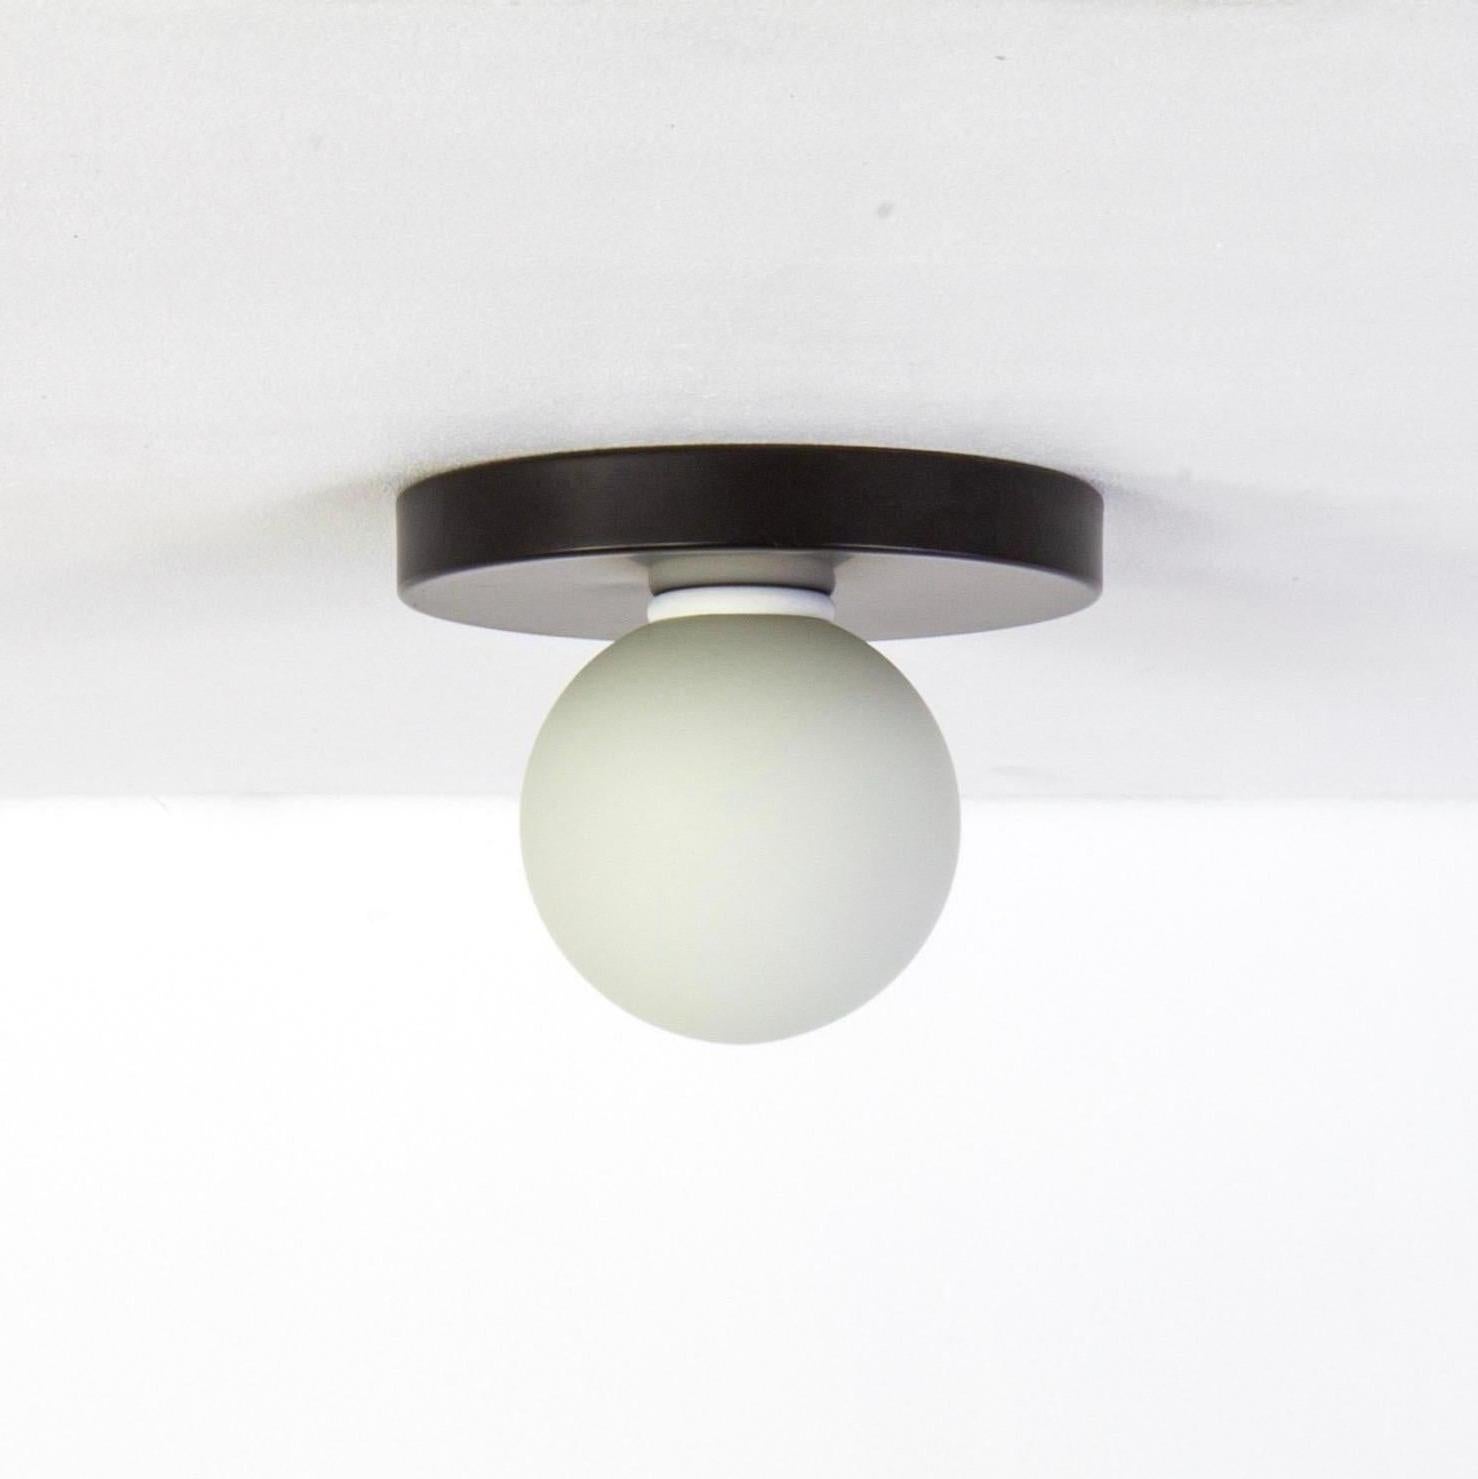 This listing is for 1x Globe Flush Mount in black designed and manufactured by Research.Lighting.

Materials: Brass, Steel & Glass
Finish: Black
Electronics: 1x G9 Socket, 1x 4.5 Watt LED Bulb (included), 450 Lumens
ADA Compliant. UL Listed. Made in